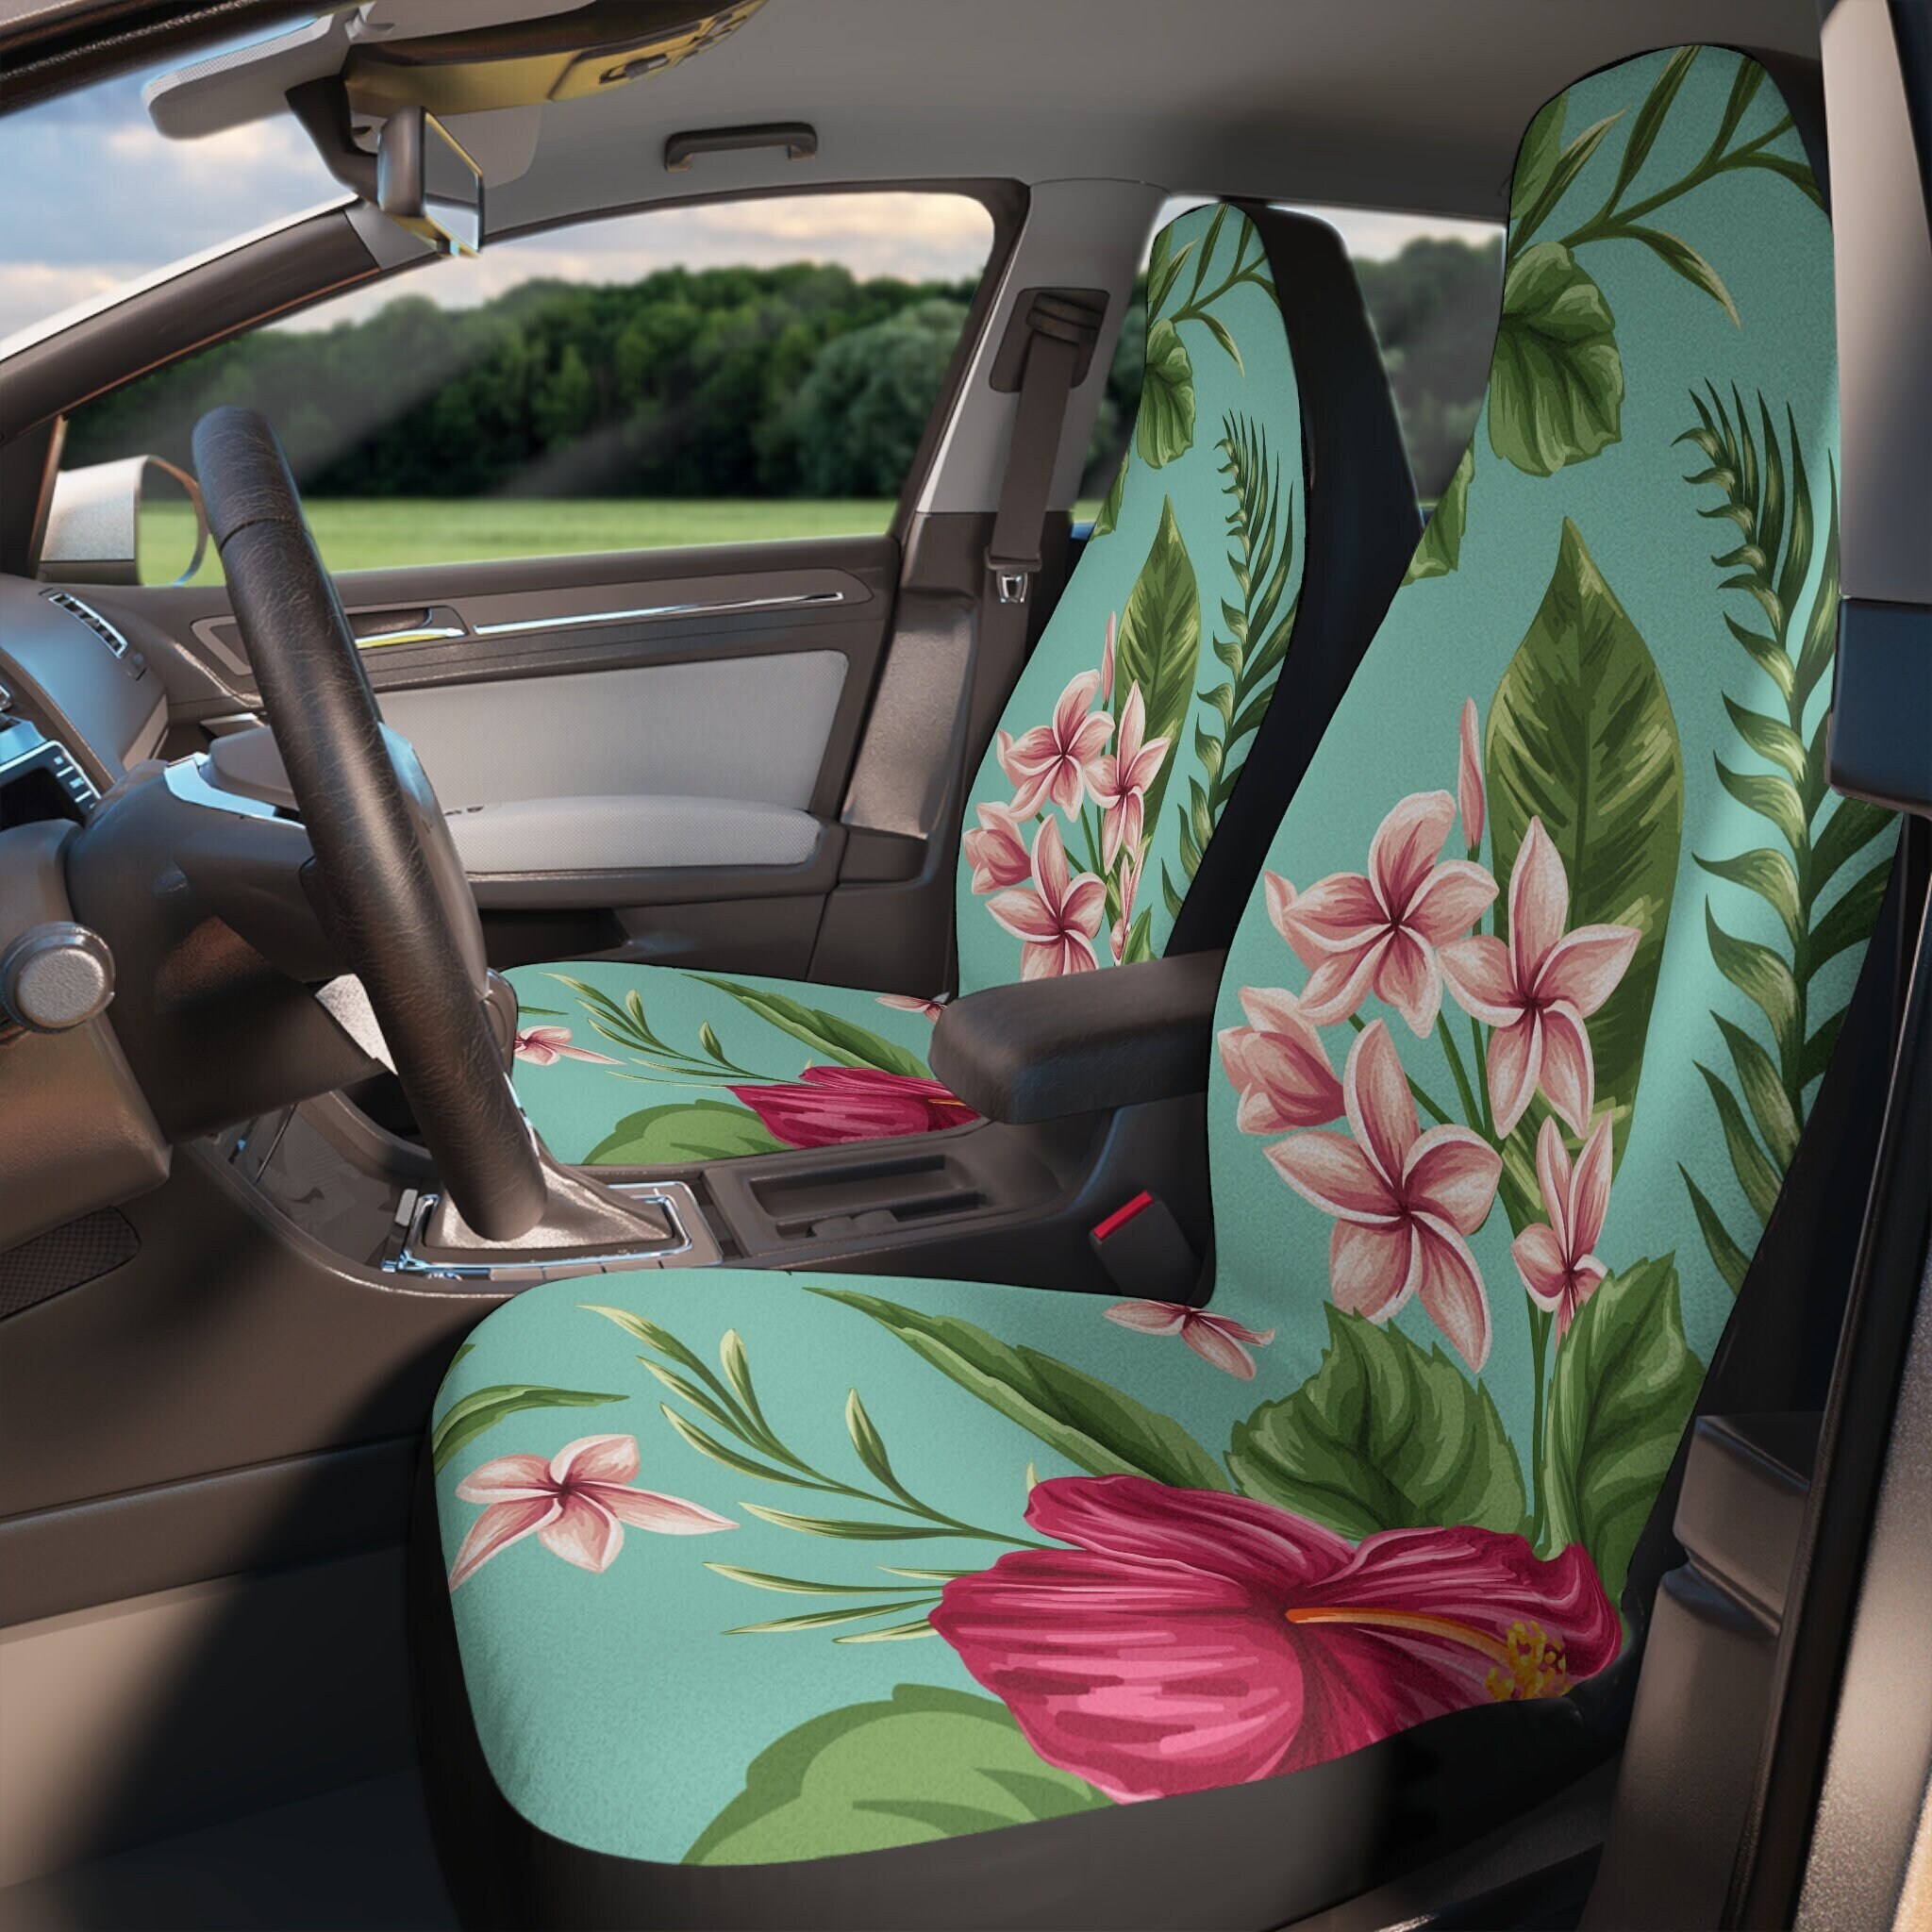 BRAND NEW Tropical Blue Butterfly Floral Car Seat Covers High Back